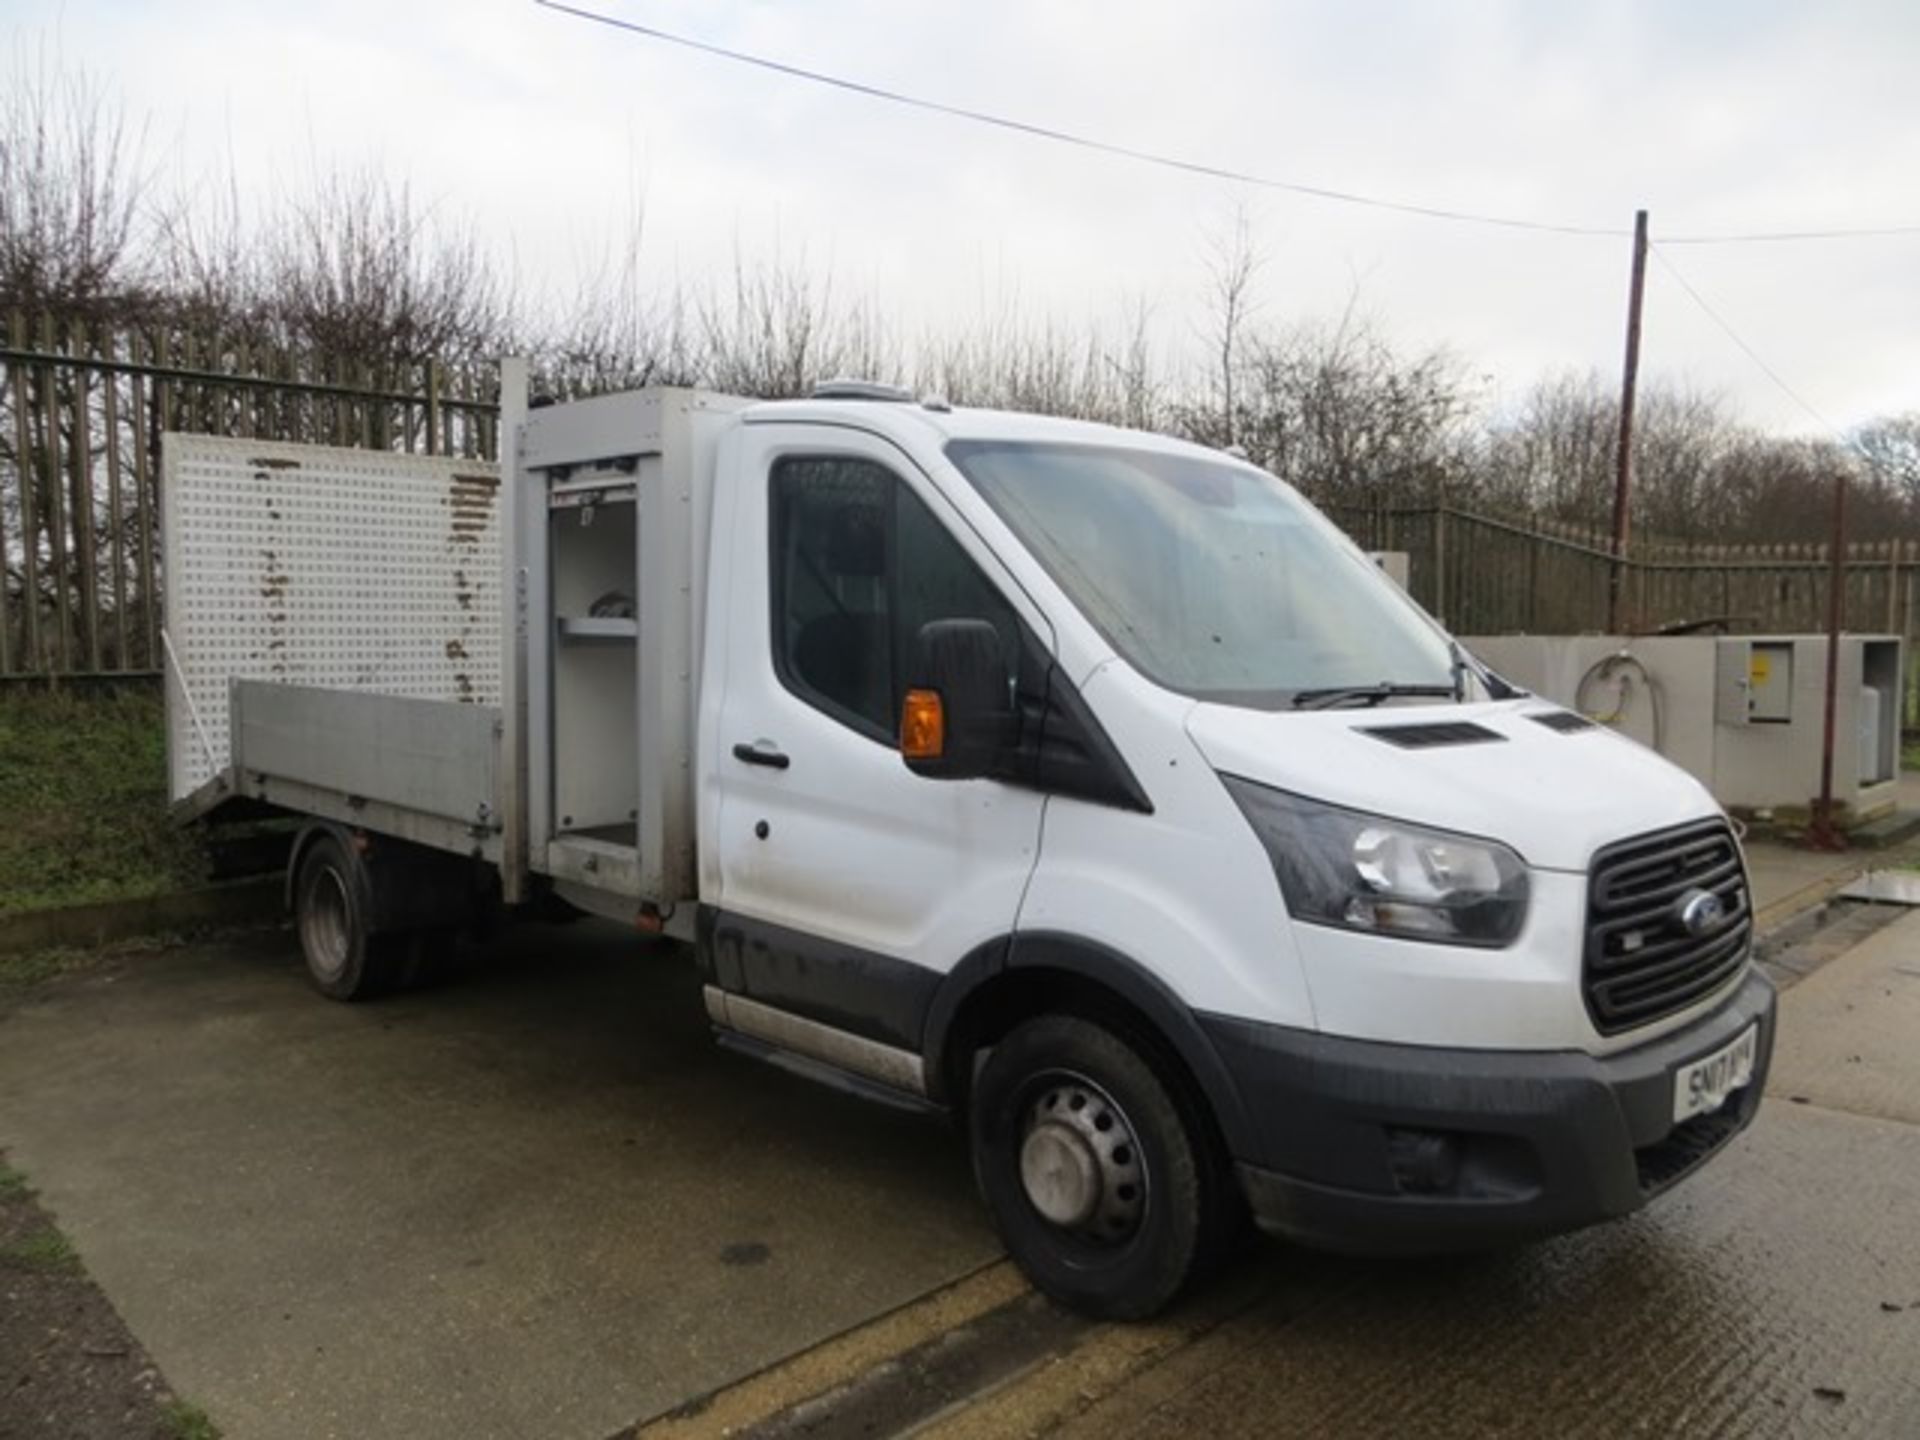 Ford Transit 350 L3 RWD diesel drop side twin wheel lorry with beaver tail. Registration Number SN17 - Image 3 of 10